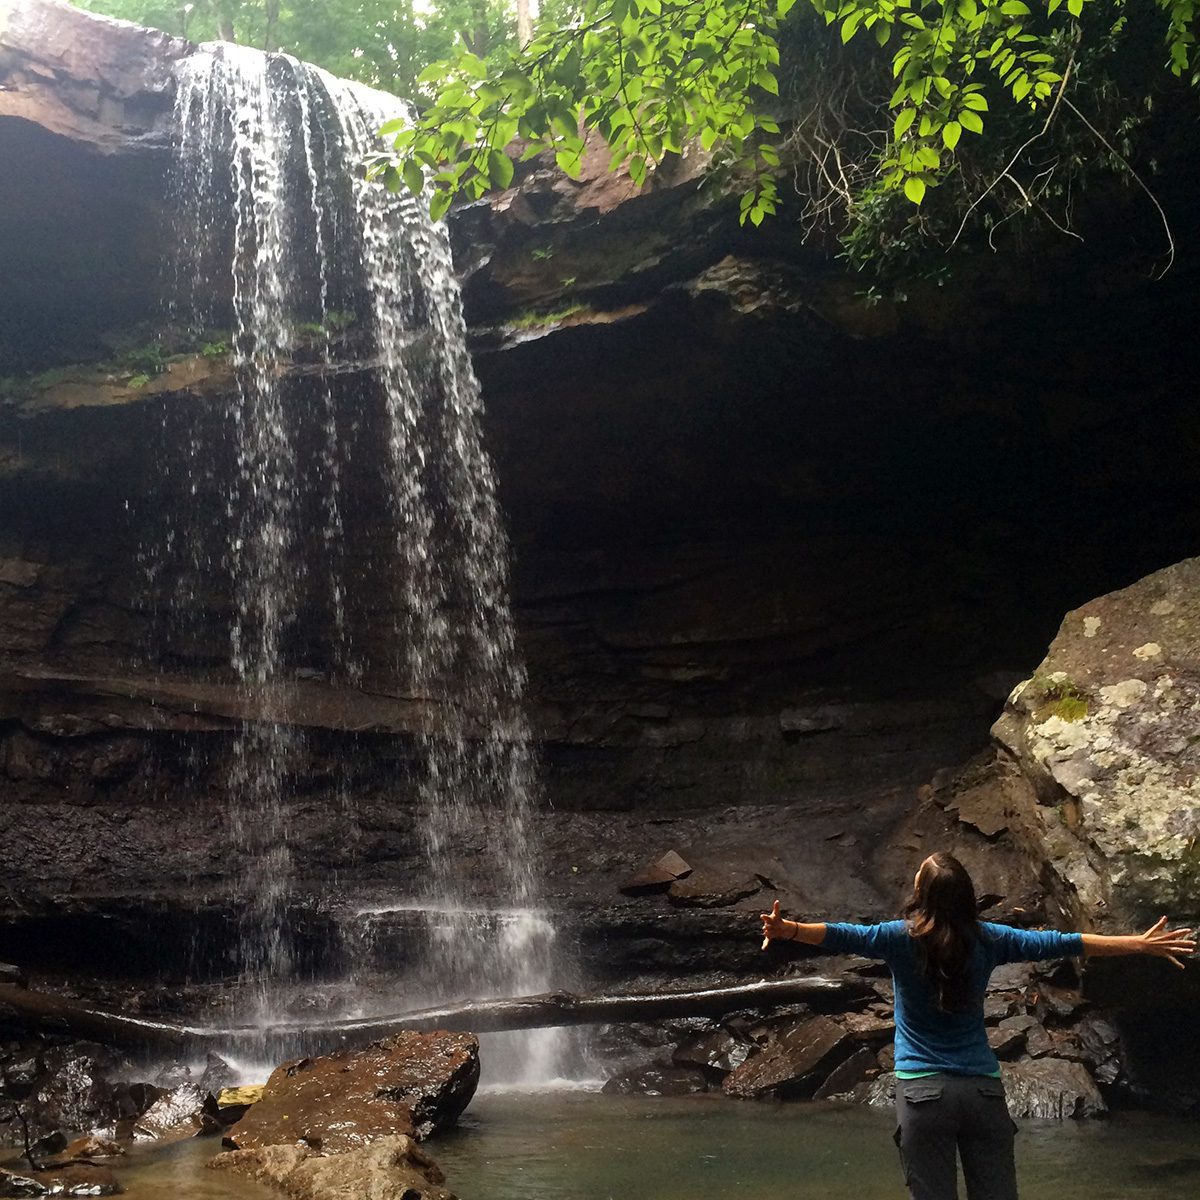 Teen Naturalists trip to Cucumber Falls by Carrie Scheick